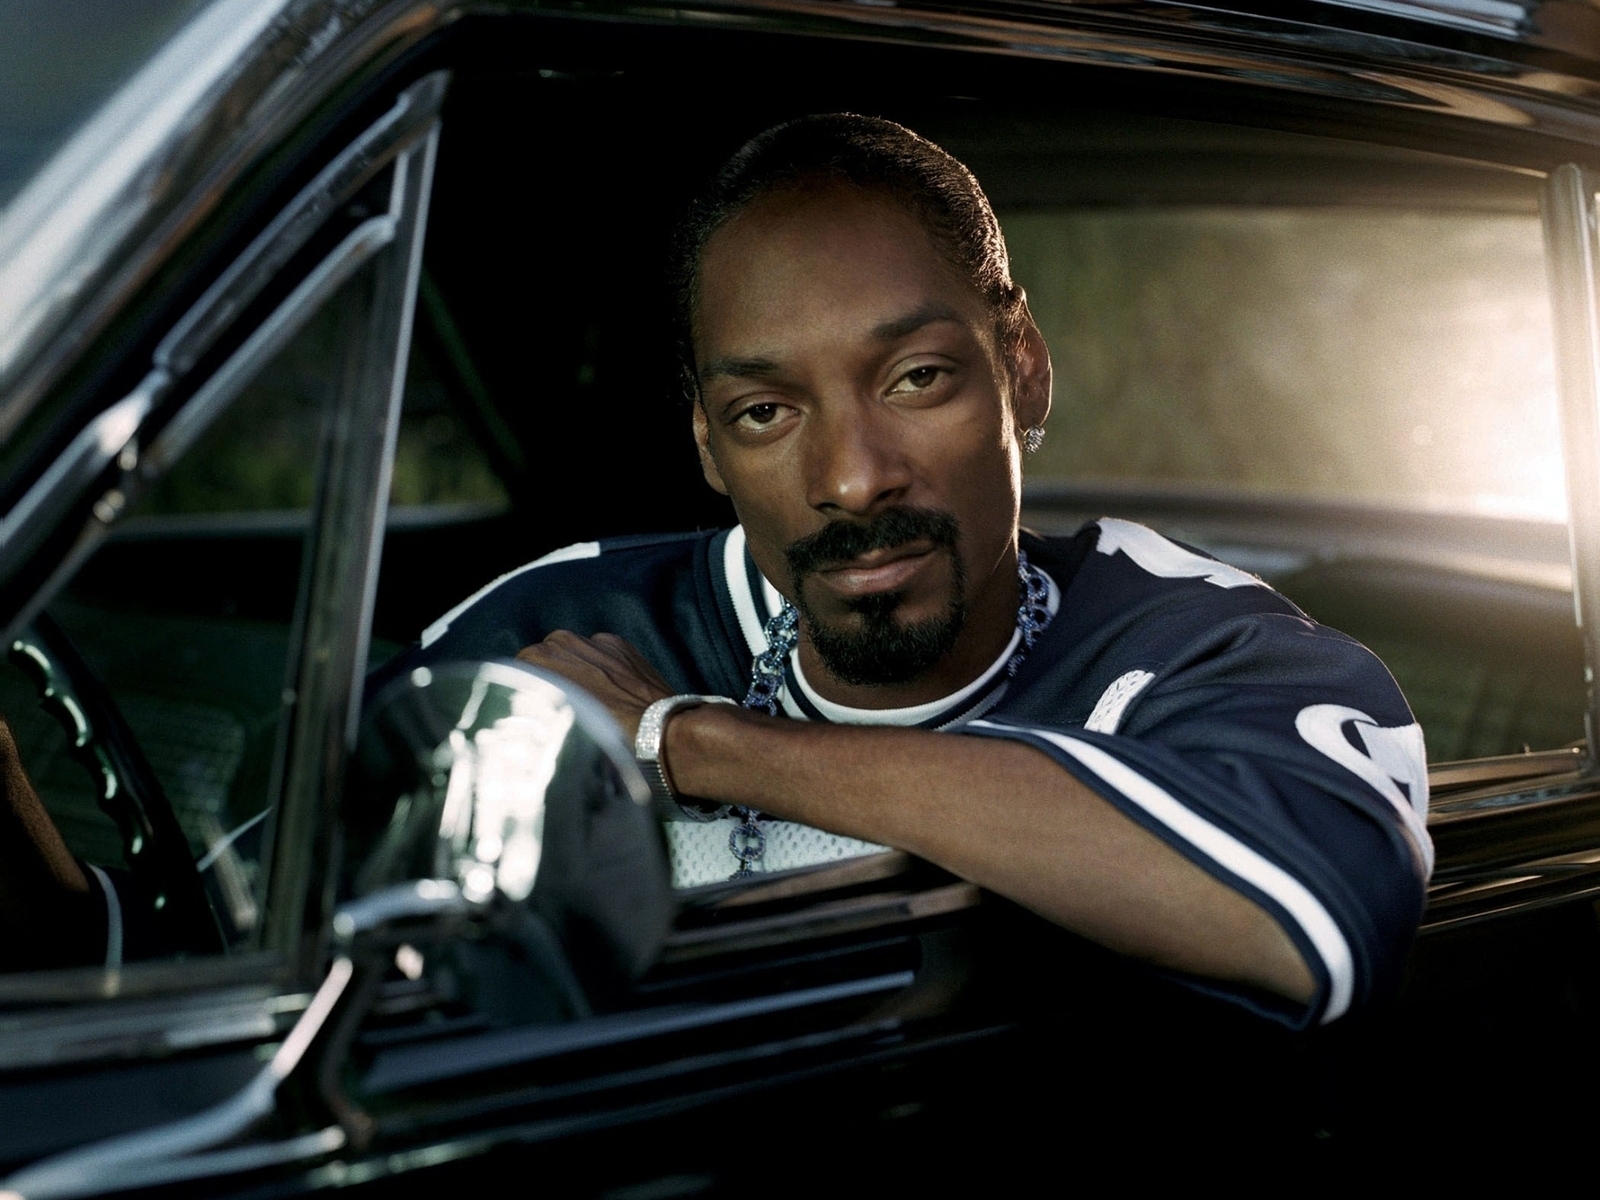 Snoop Dogg Look for 1600 x 1200 resolution